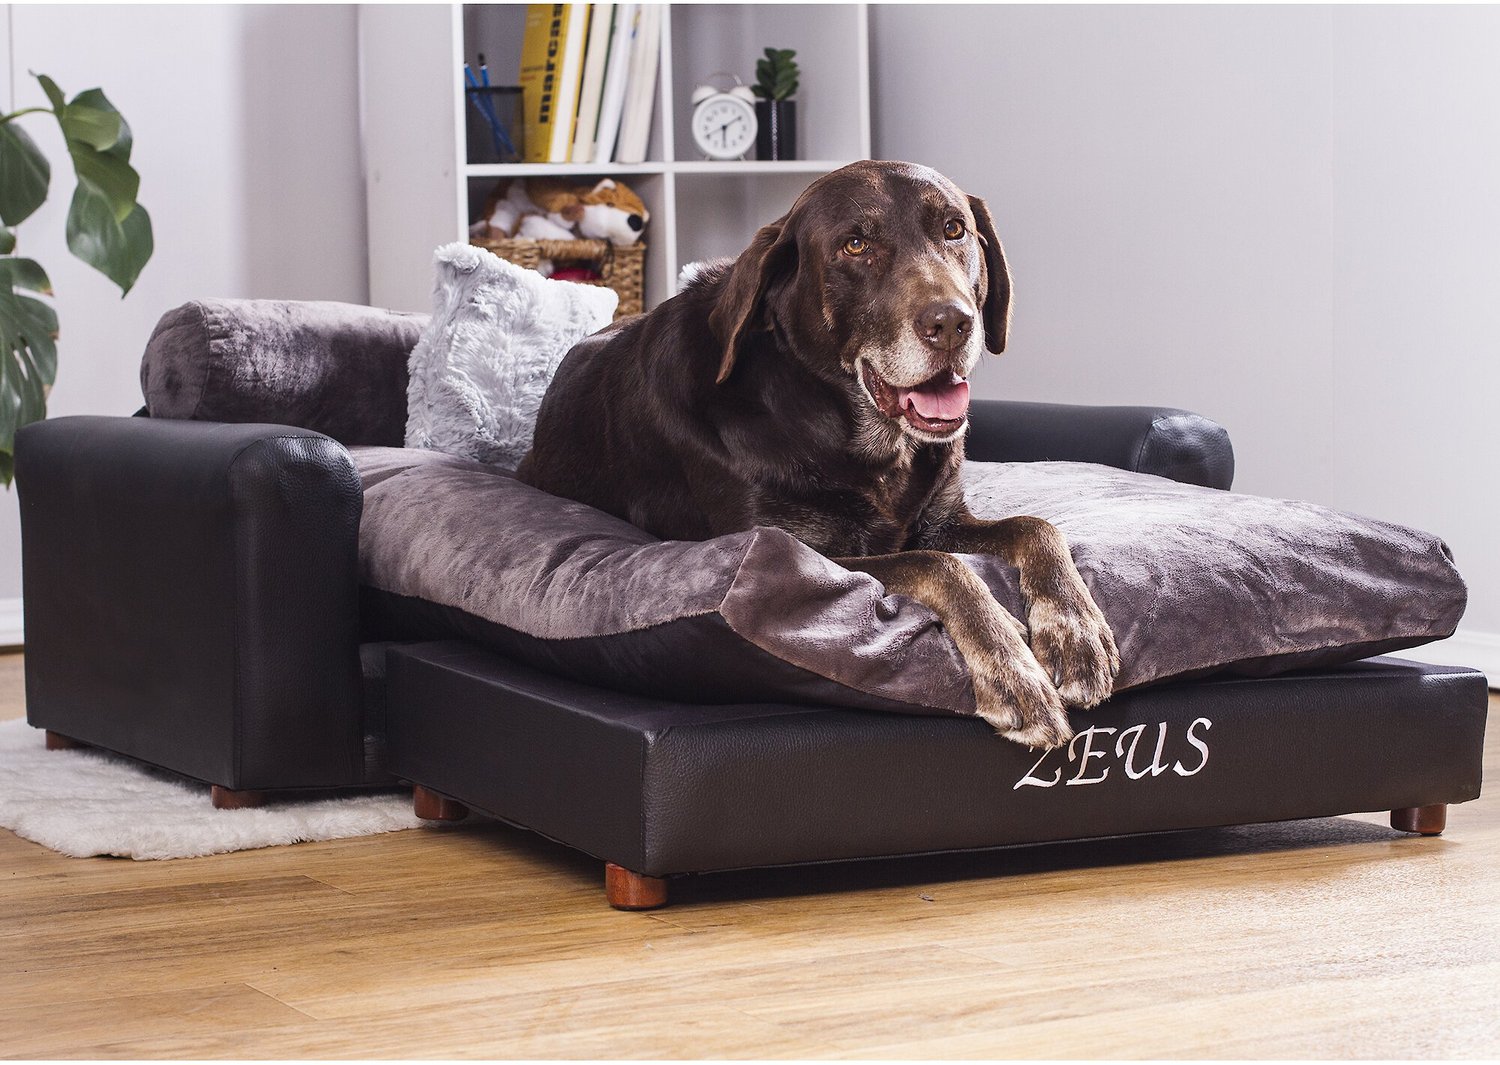 twist favorite terrorist MOOTS Personalized Leatherette Sofa Cat & Dog Bed, Charcoal, X-Large -  Chewy.com